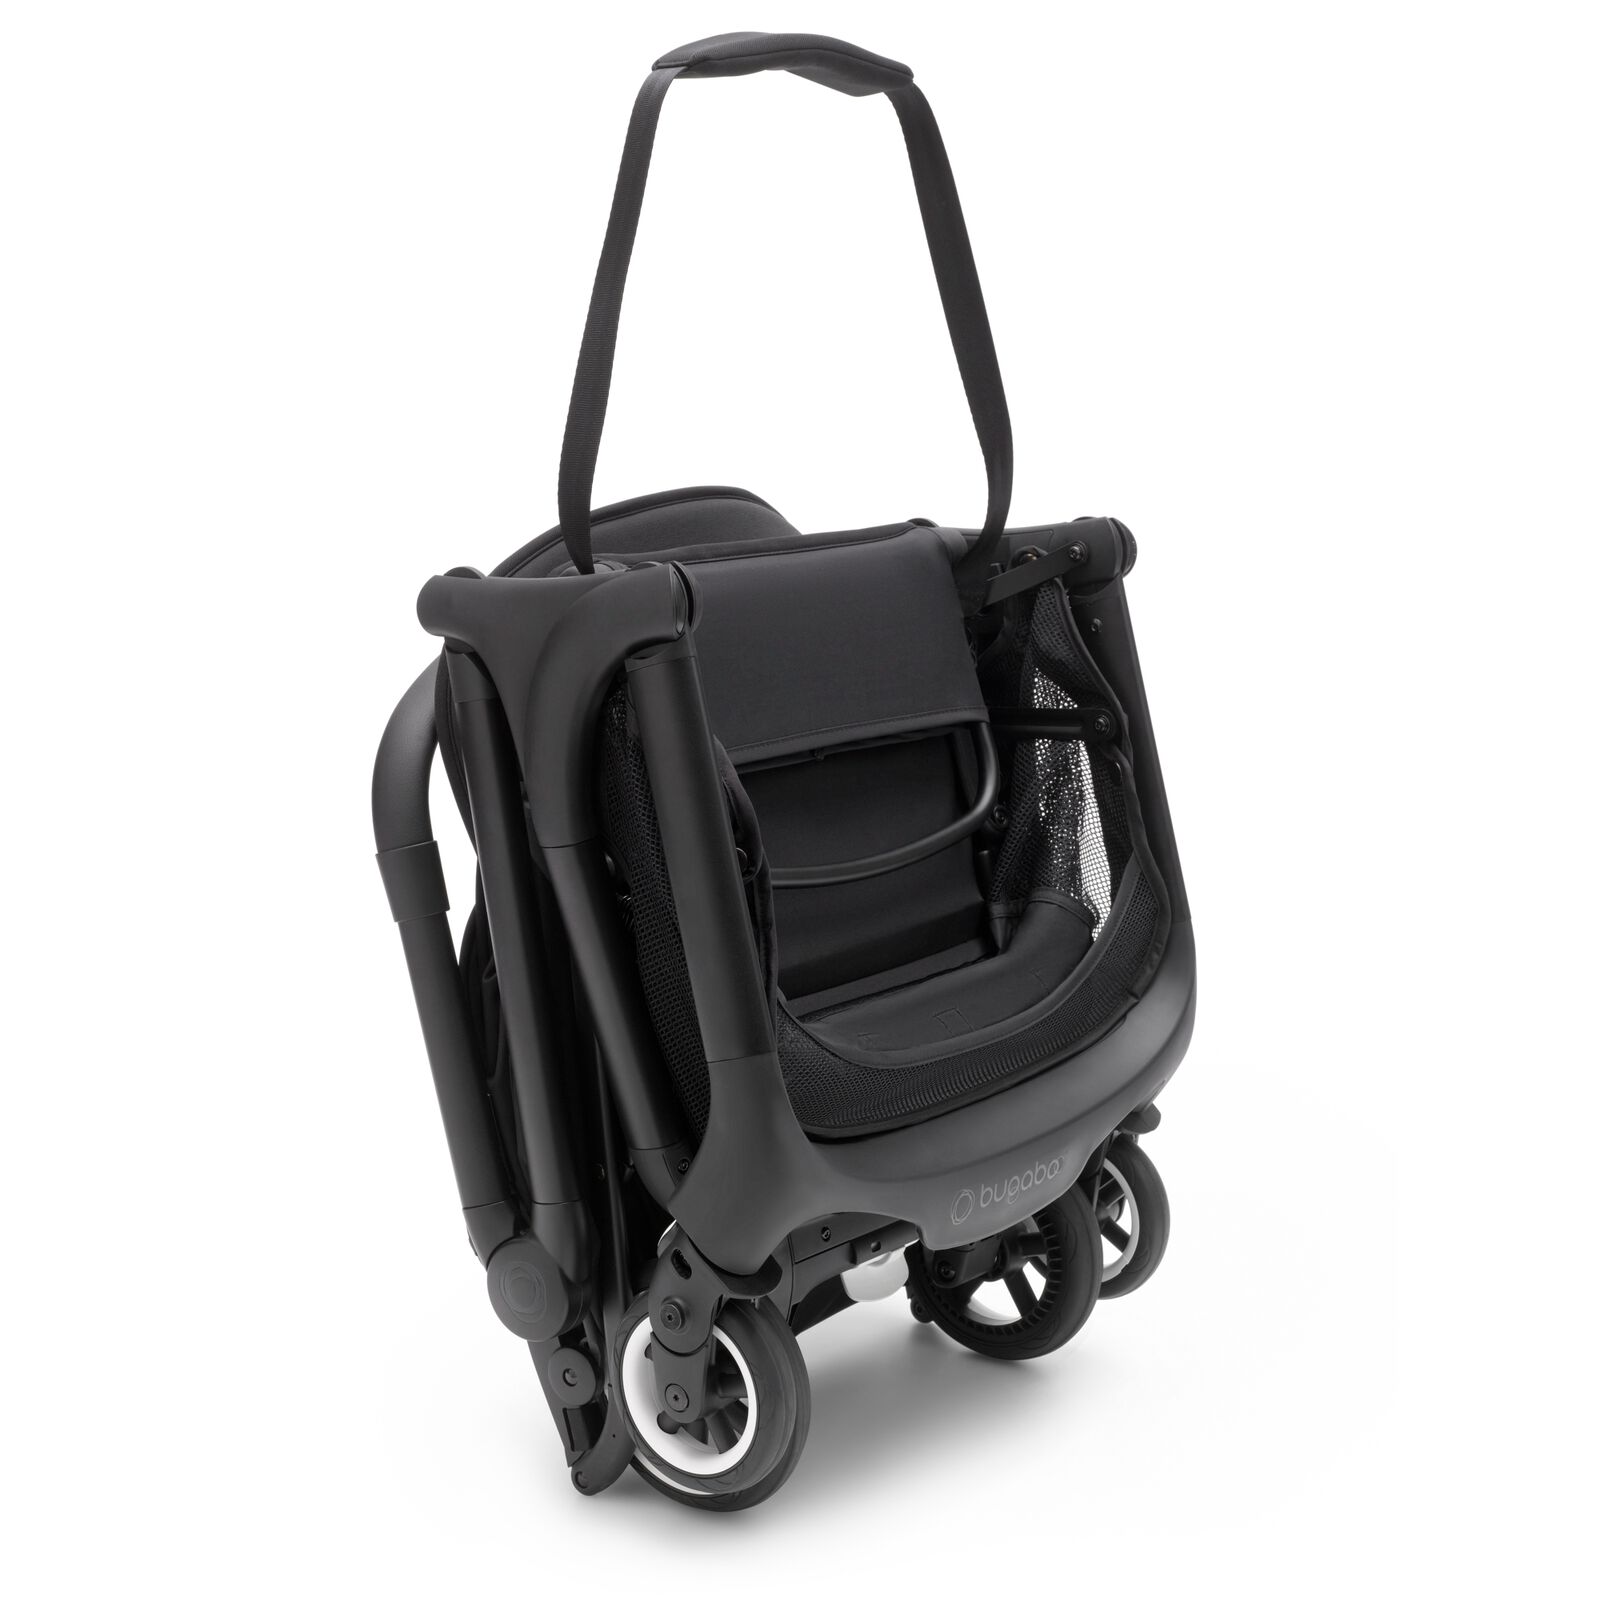 Bugaboo Butterfly carry strap